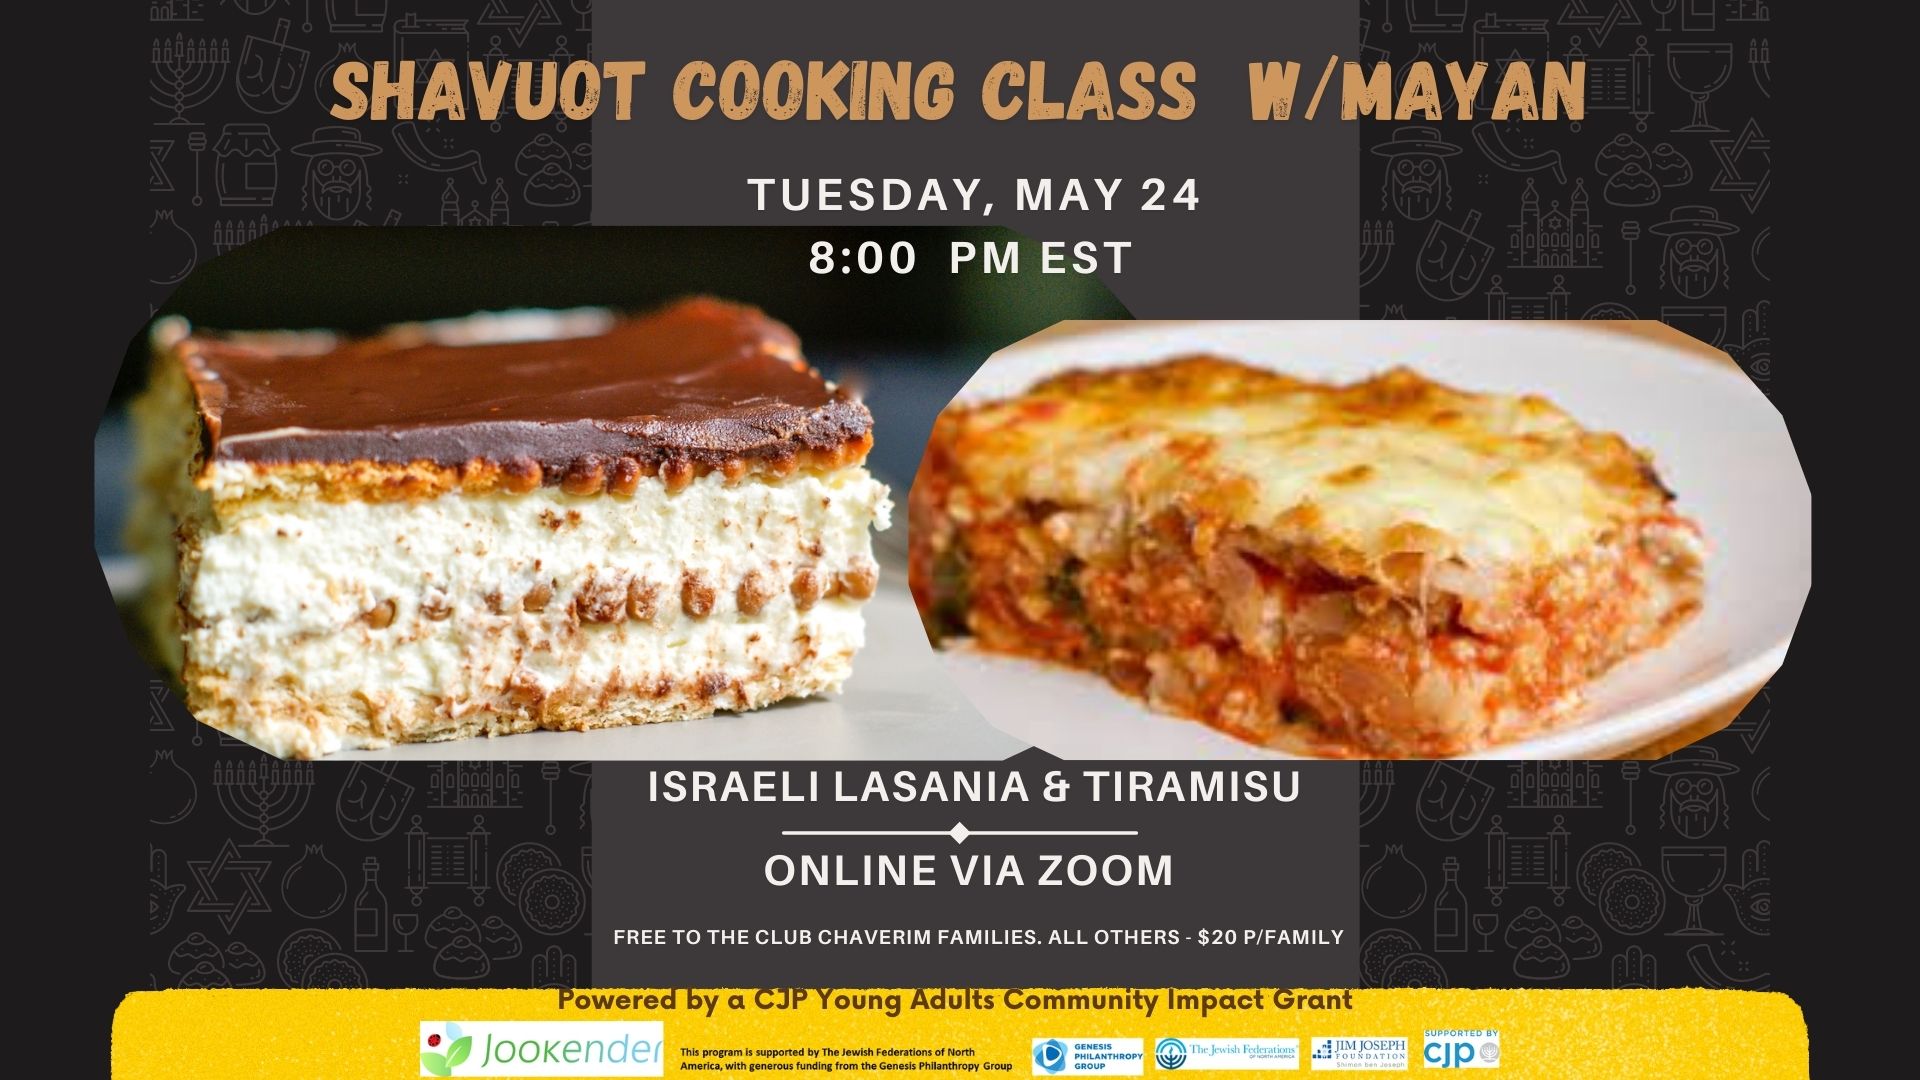 Shavuot Cooking Class